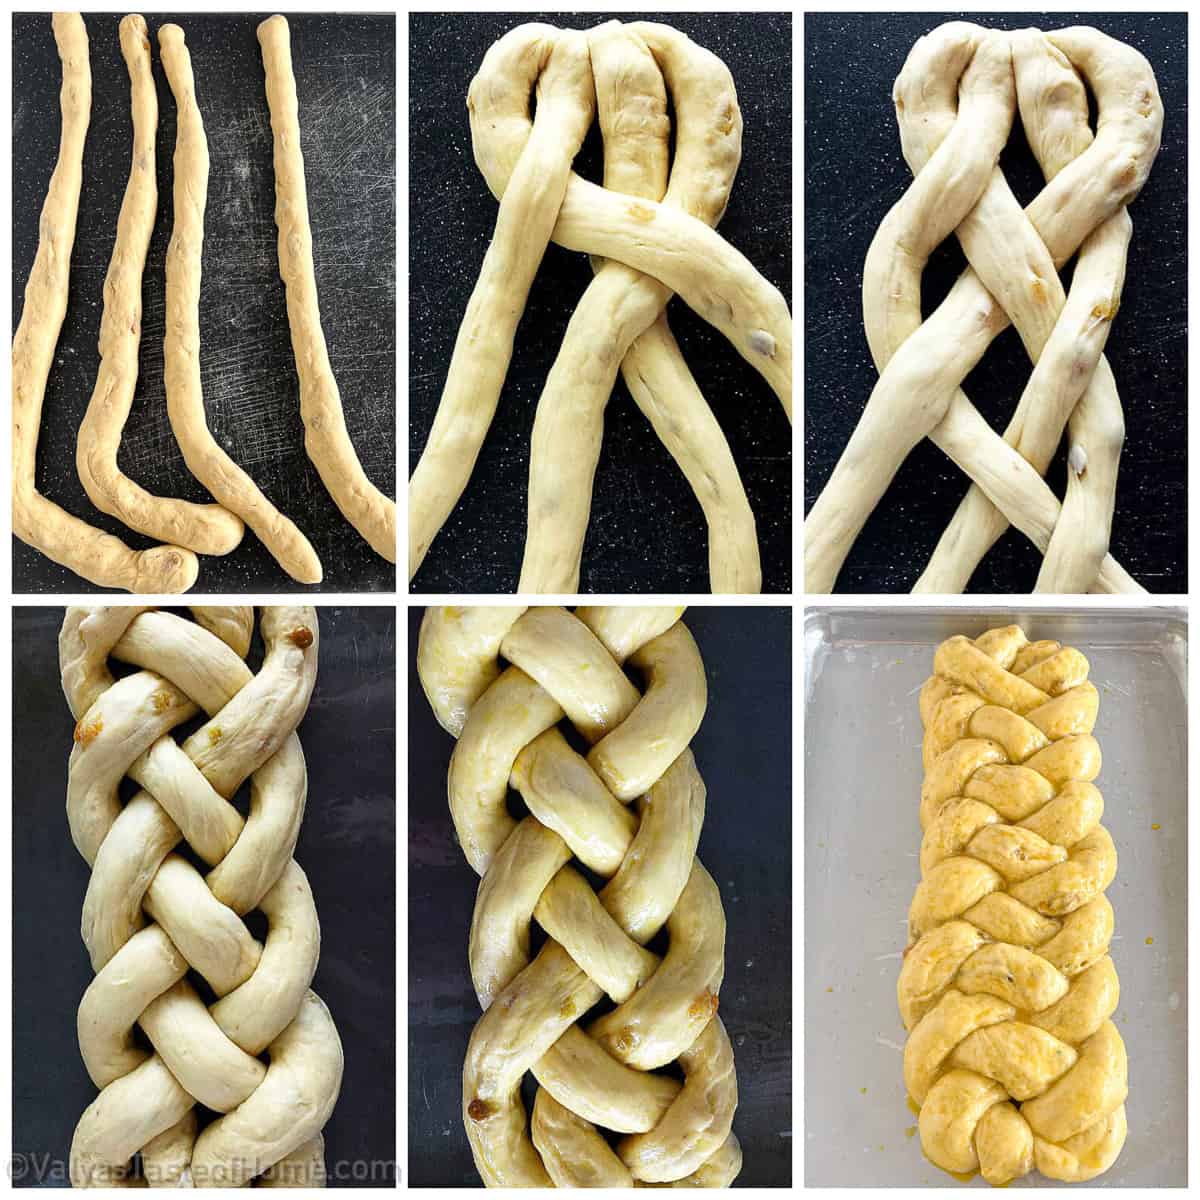 Shaping and braiding the Challah is pretty easy, follow the picture instructions. 